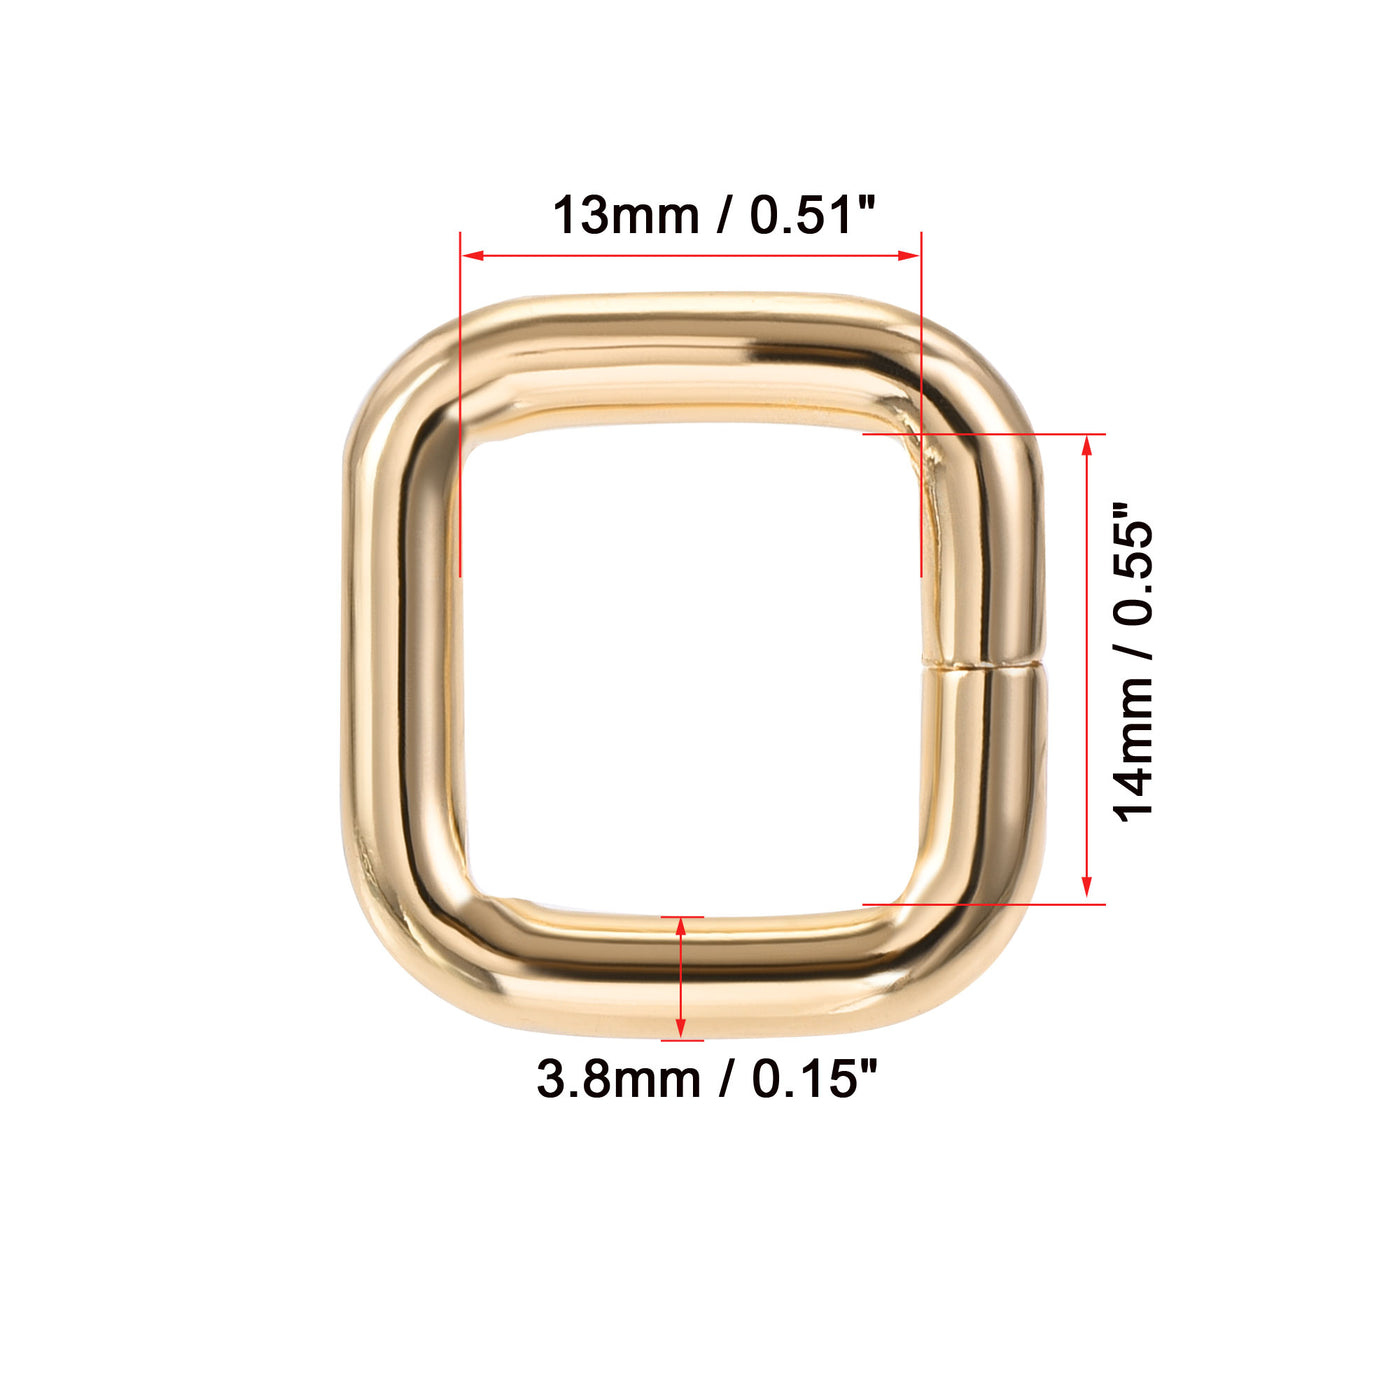 Uxcell Uxcell Metal Rectangle Ring Buckles 14x13mm for Bags Belts DIY Gold Tone 10pcs